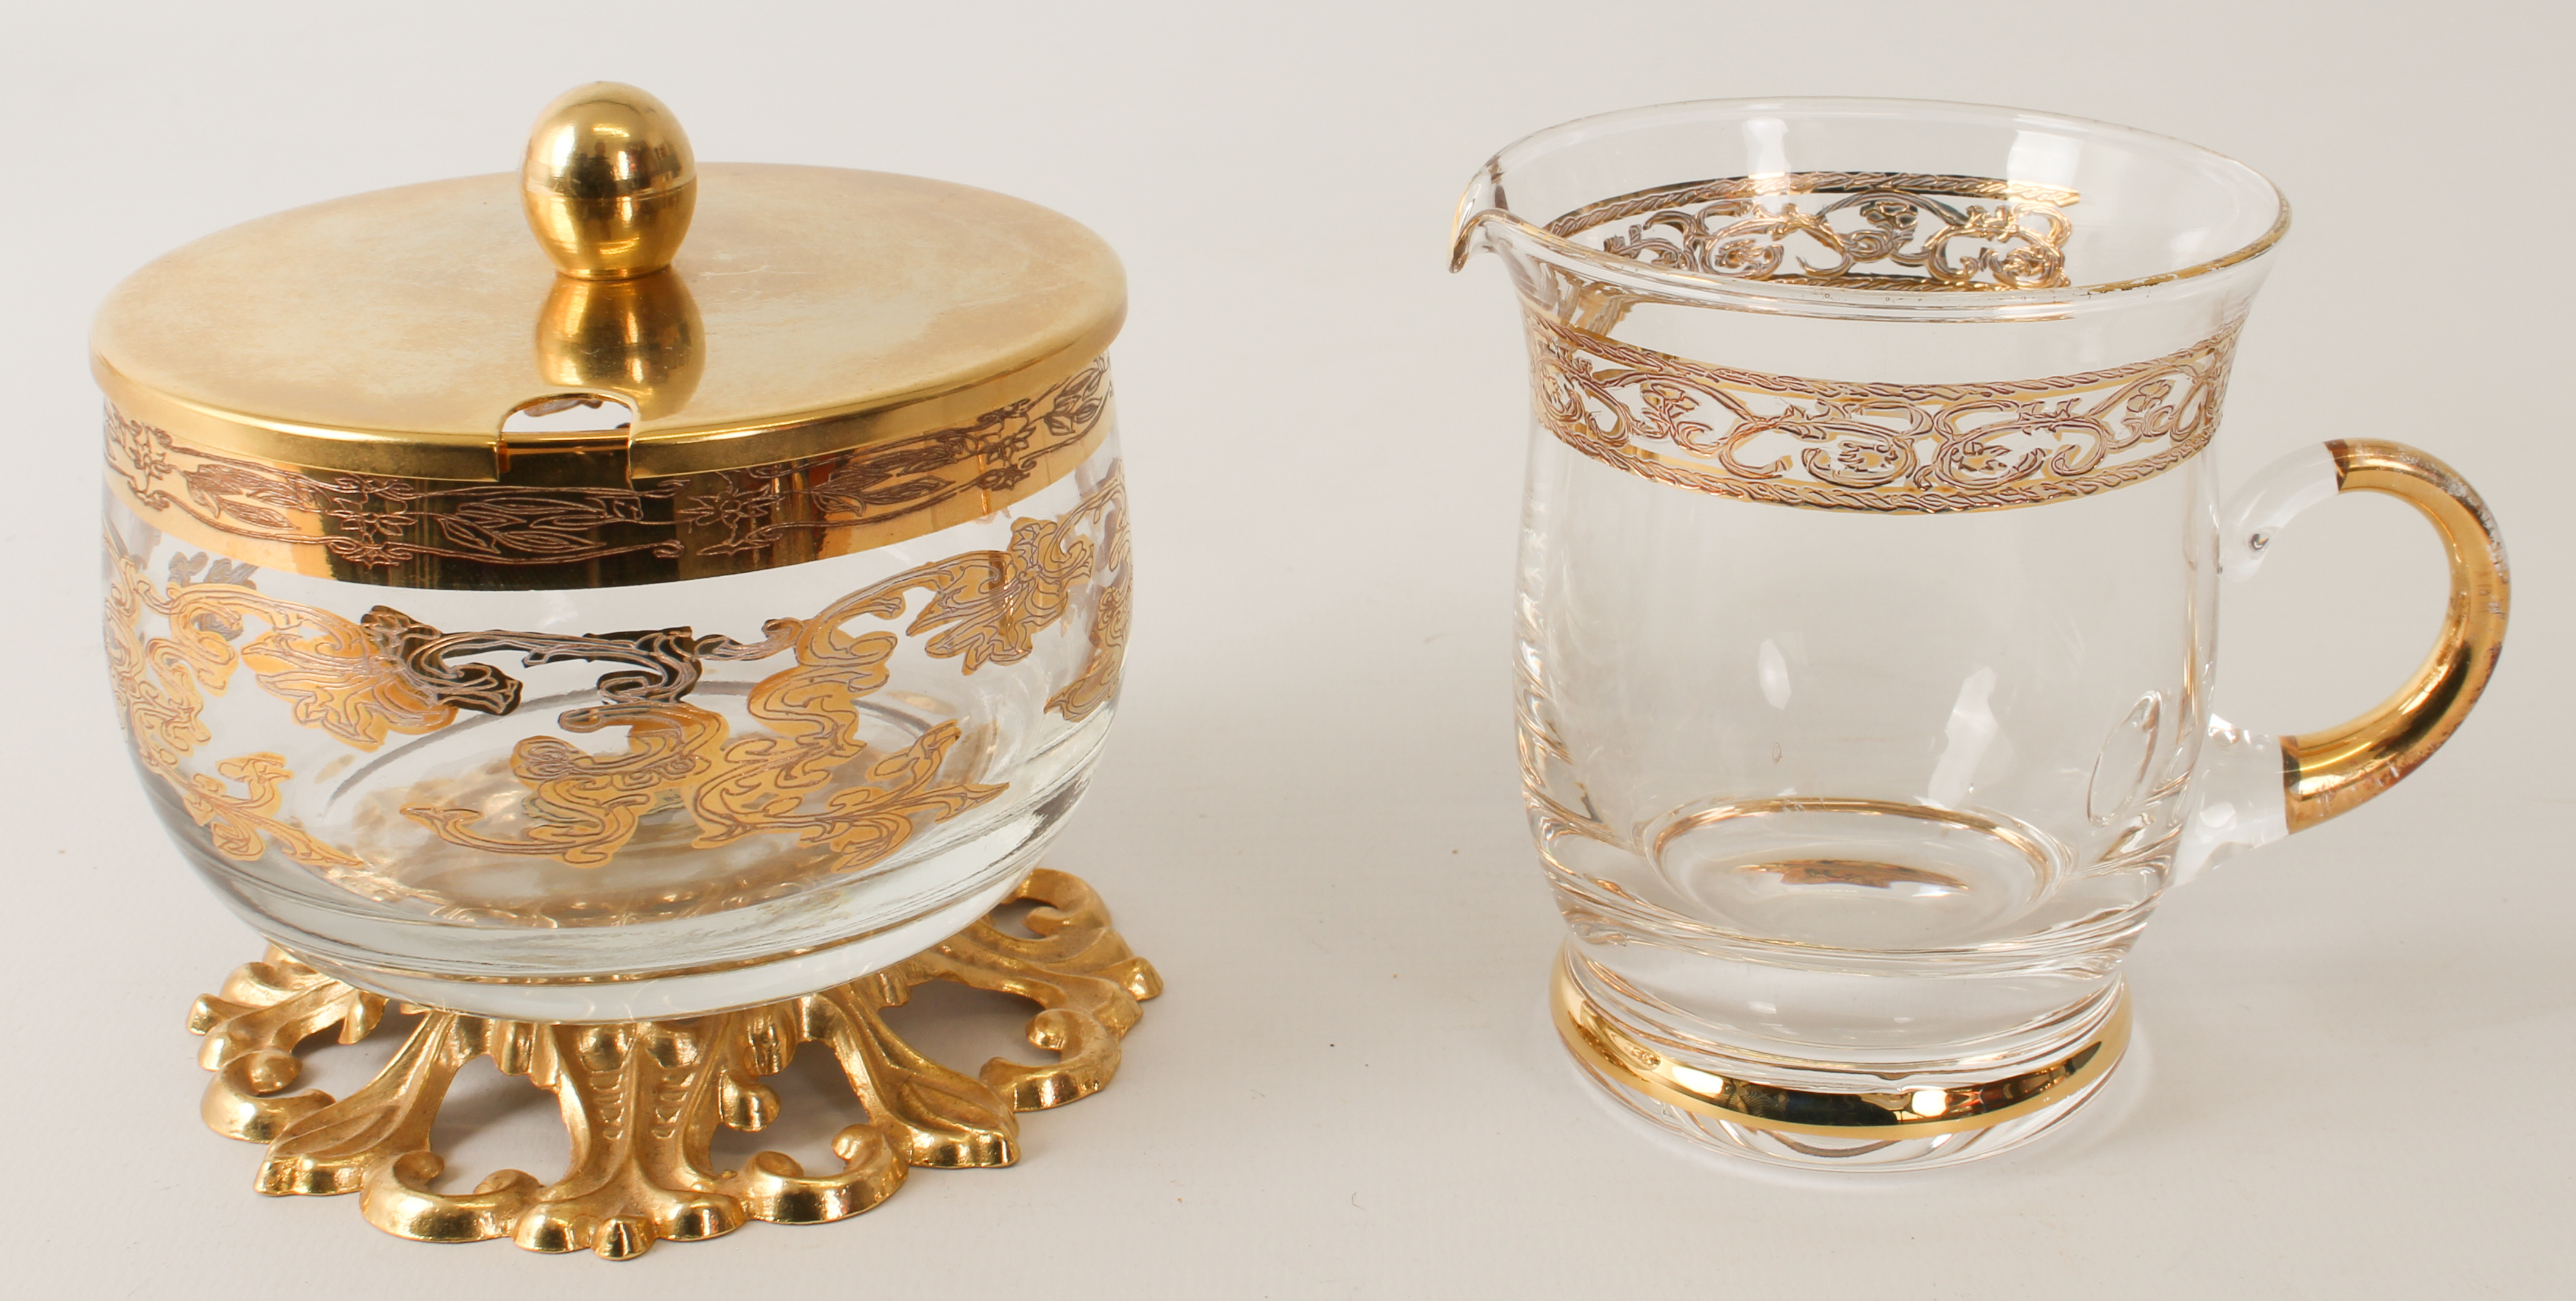 An Italian gilt-decorated glass tea and coffee service in the Florentine taste by Interglass and - Image 5 of 5